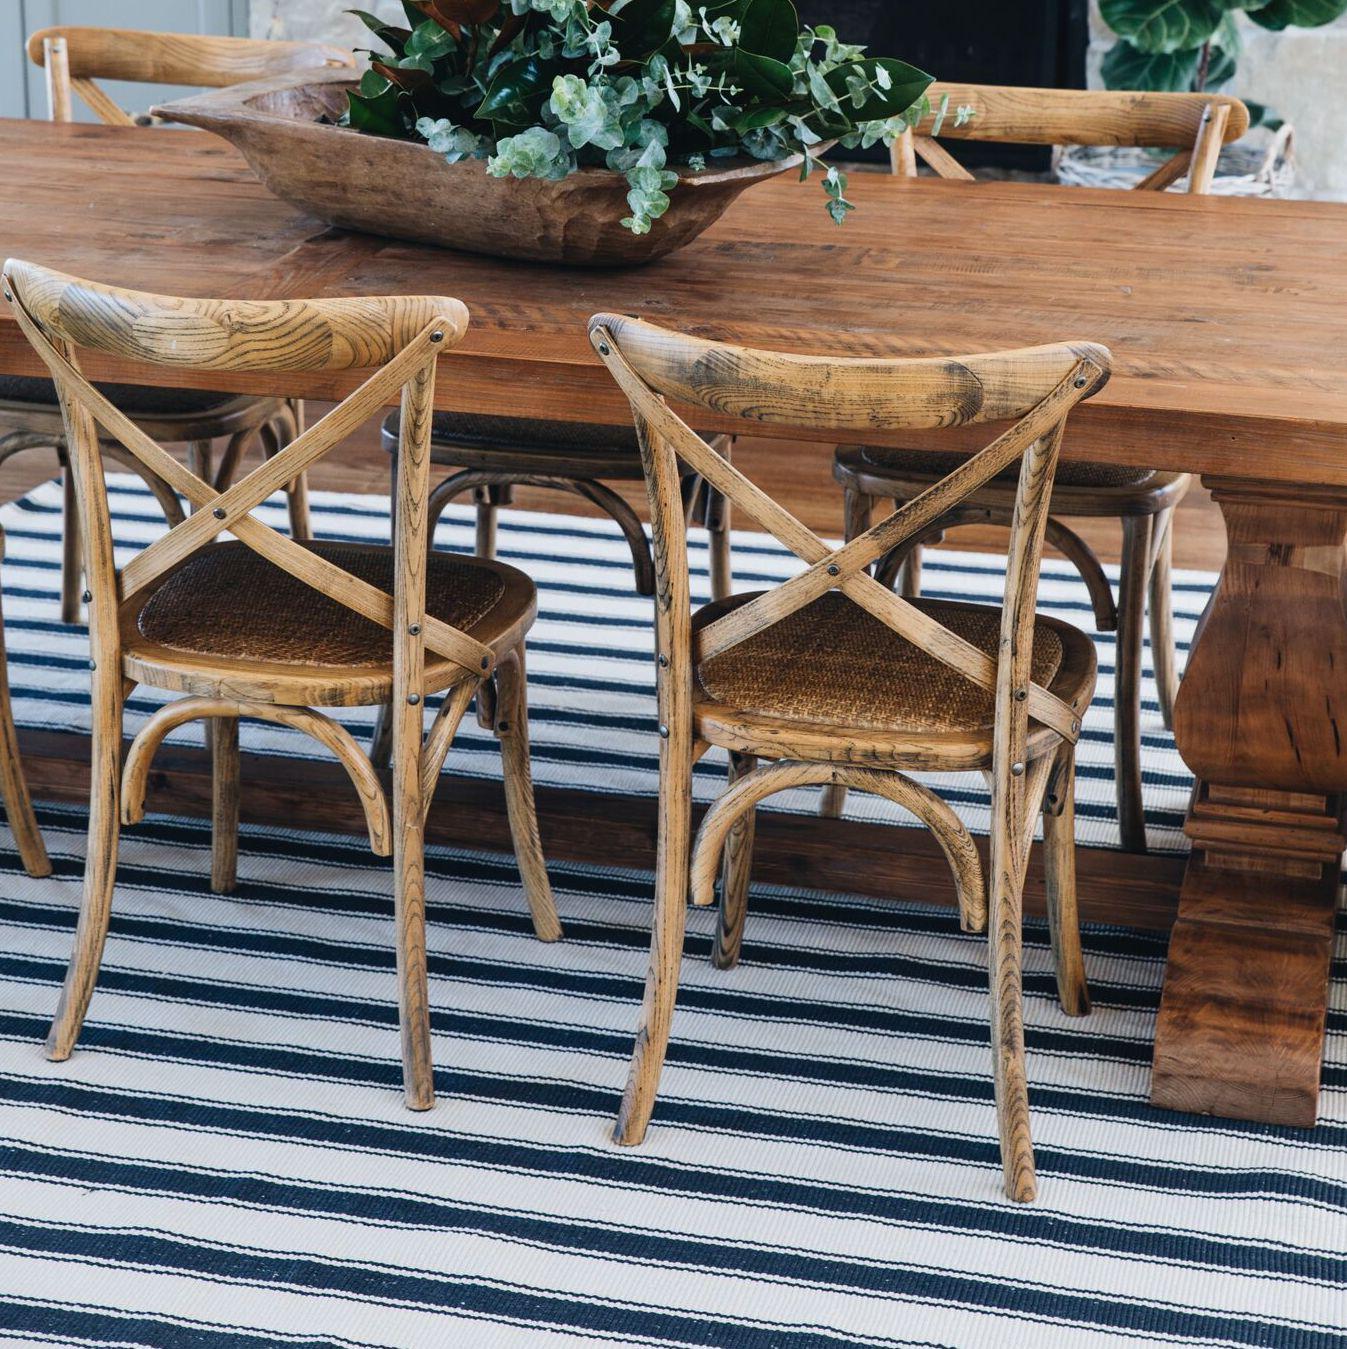 3 Reasons to Use Indoor/Outdoor Rugs INSIDE your Home